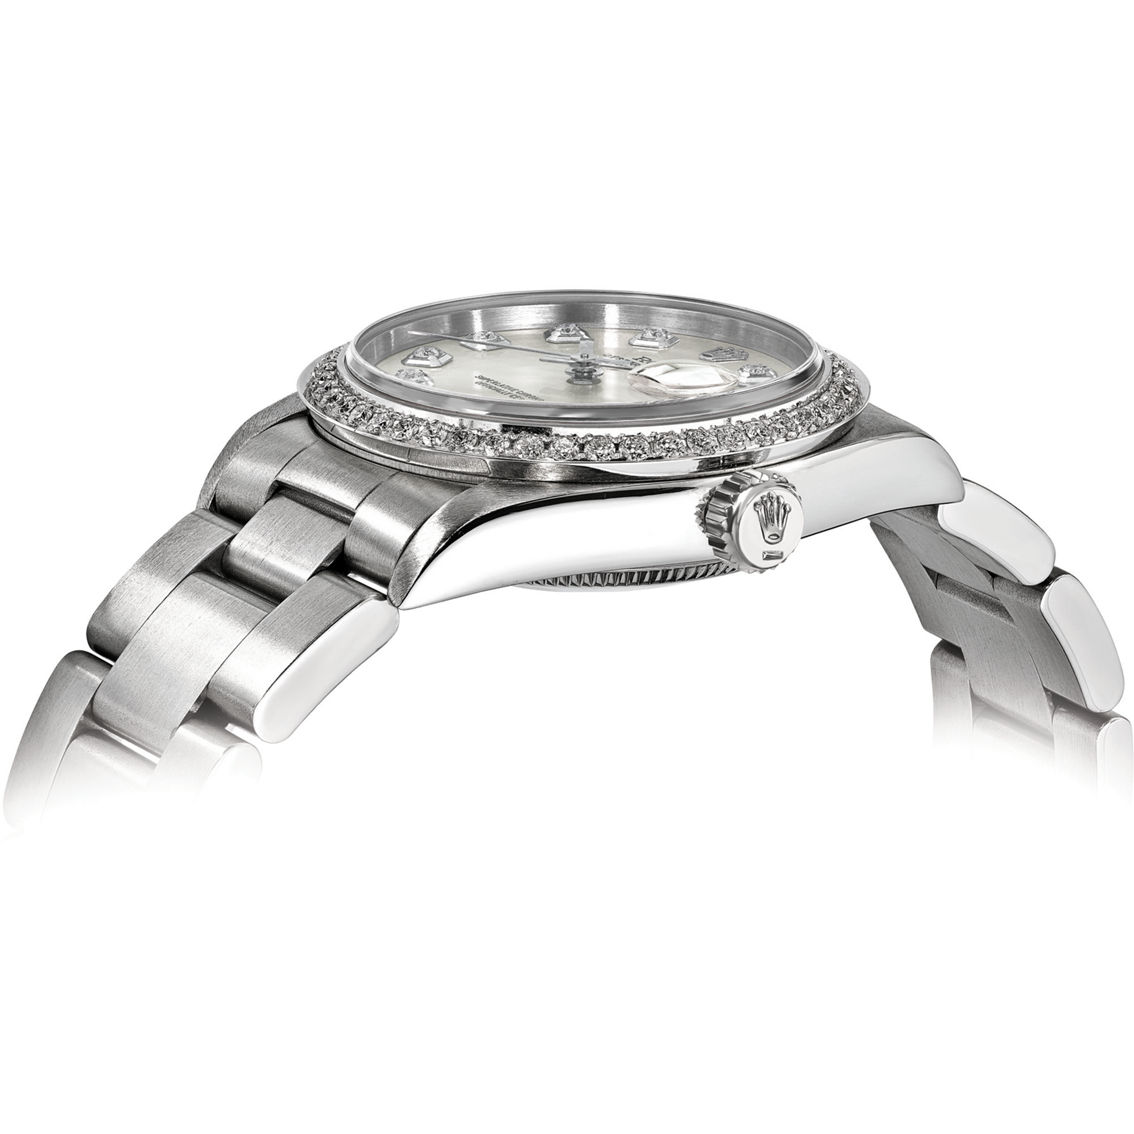 Rolex Men's\Women's Independently Certified Diamond Watch CRX135 (Pre-Owned) - Image 3 of 9